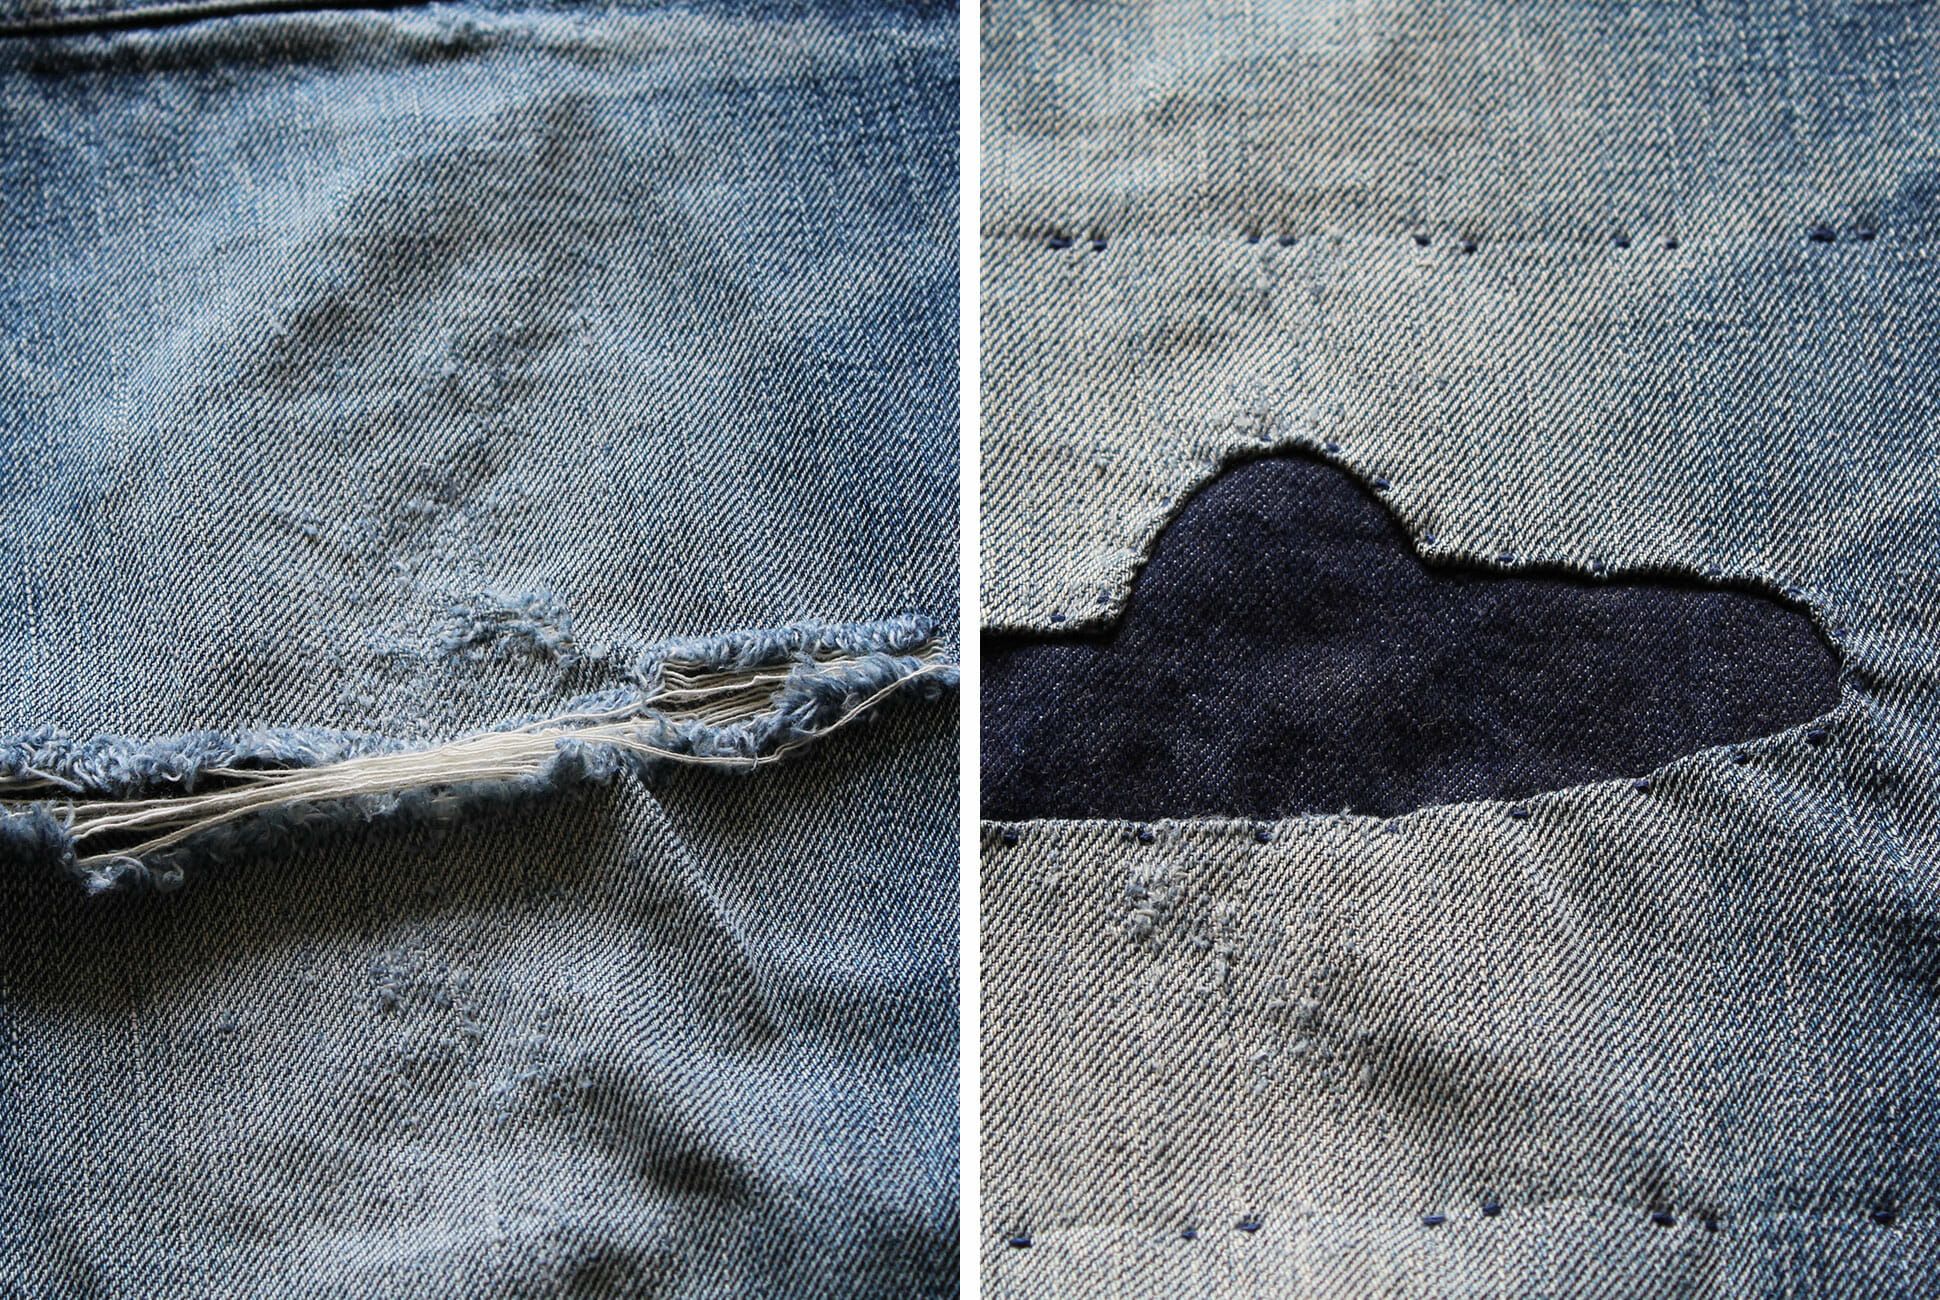 HOW TO PATCH A HOLE IN YOUR JEANS - Merrick's Art